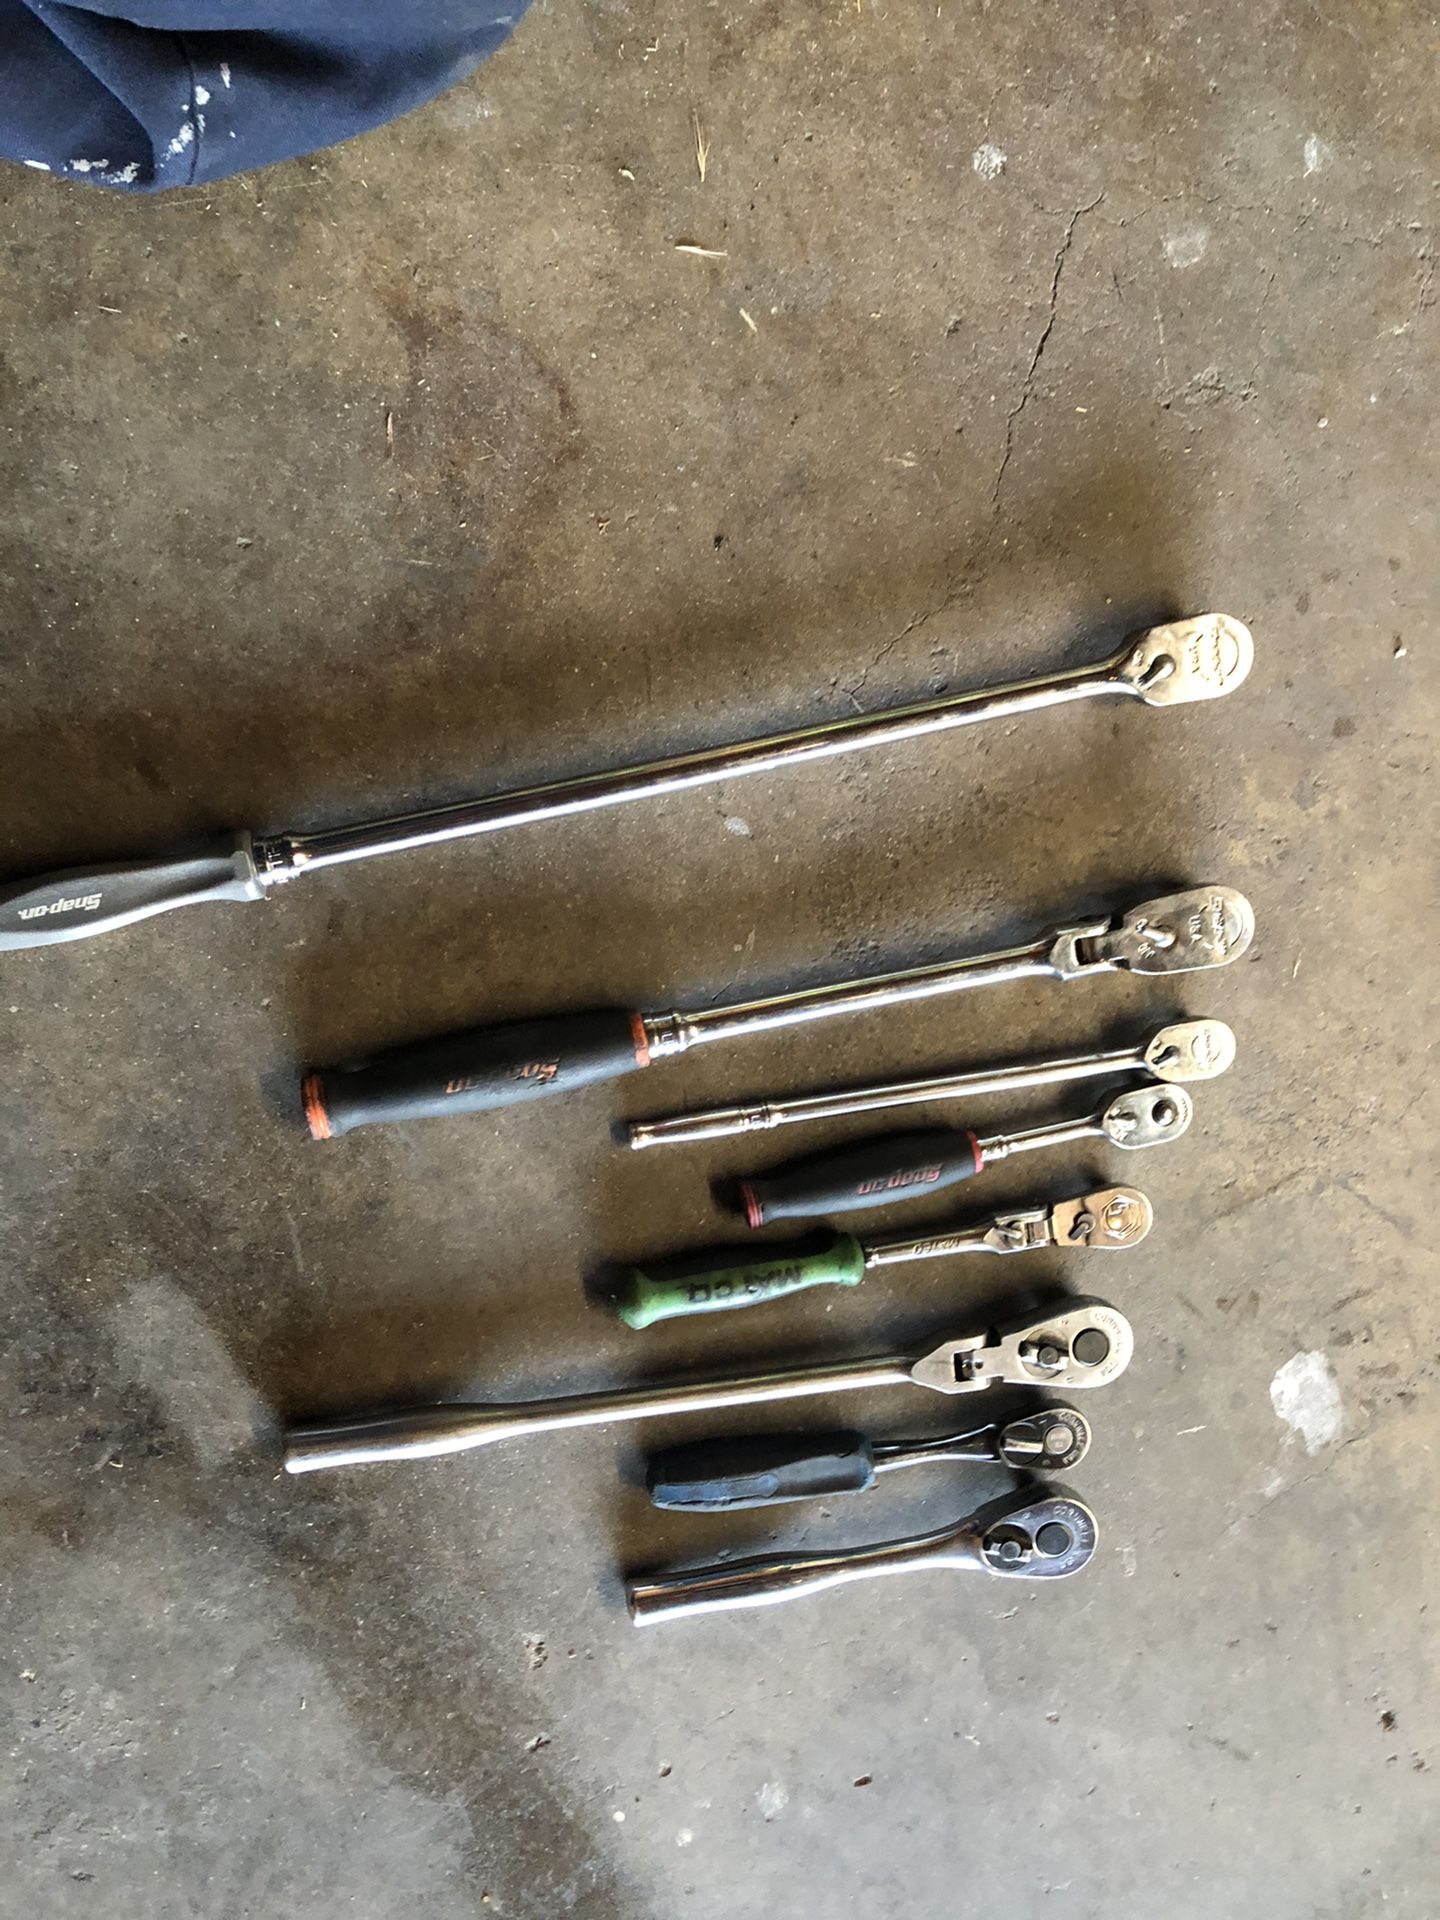 3/8 and 1/4 wrench bundle set